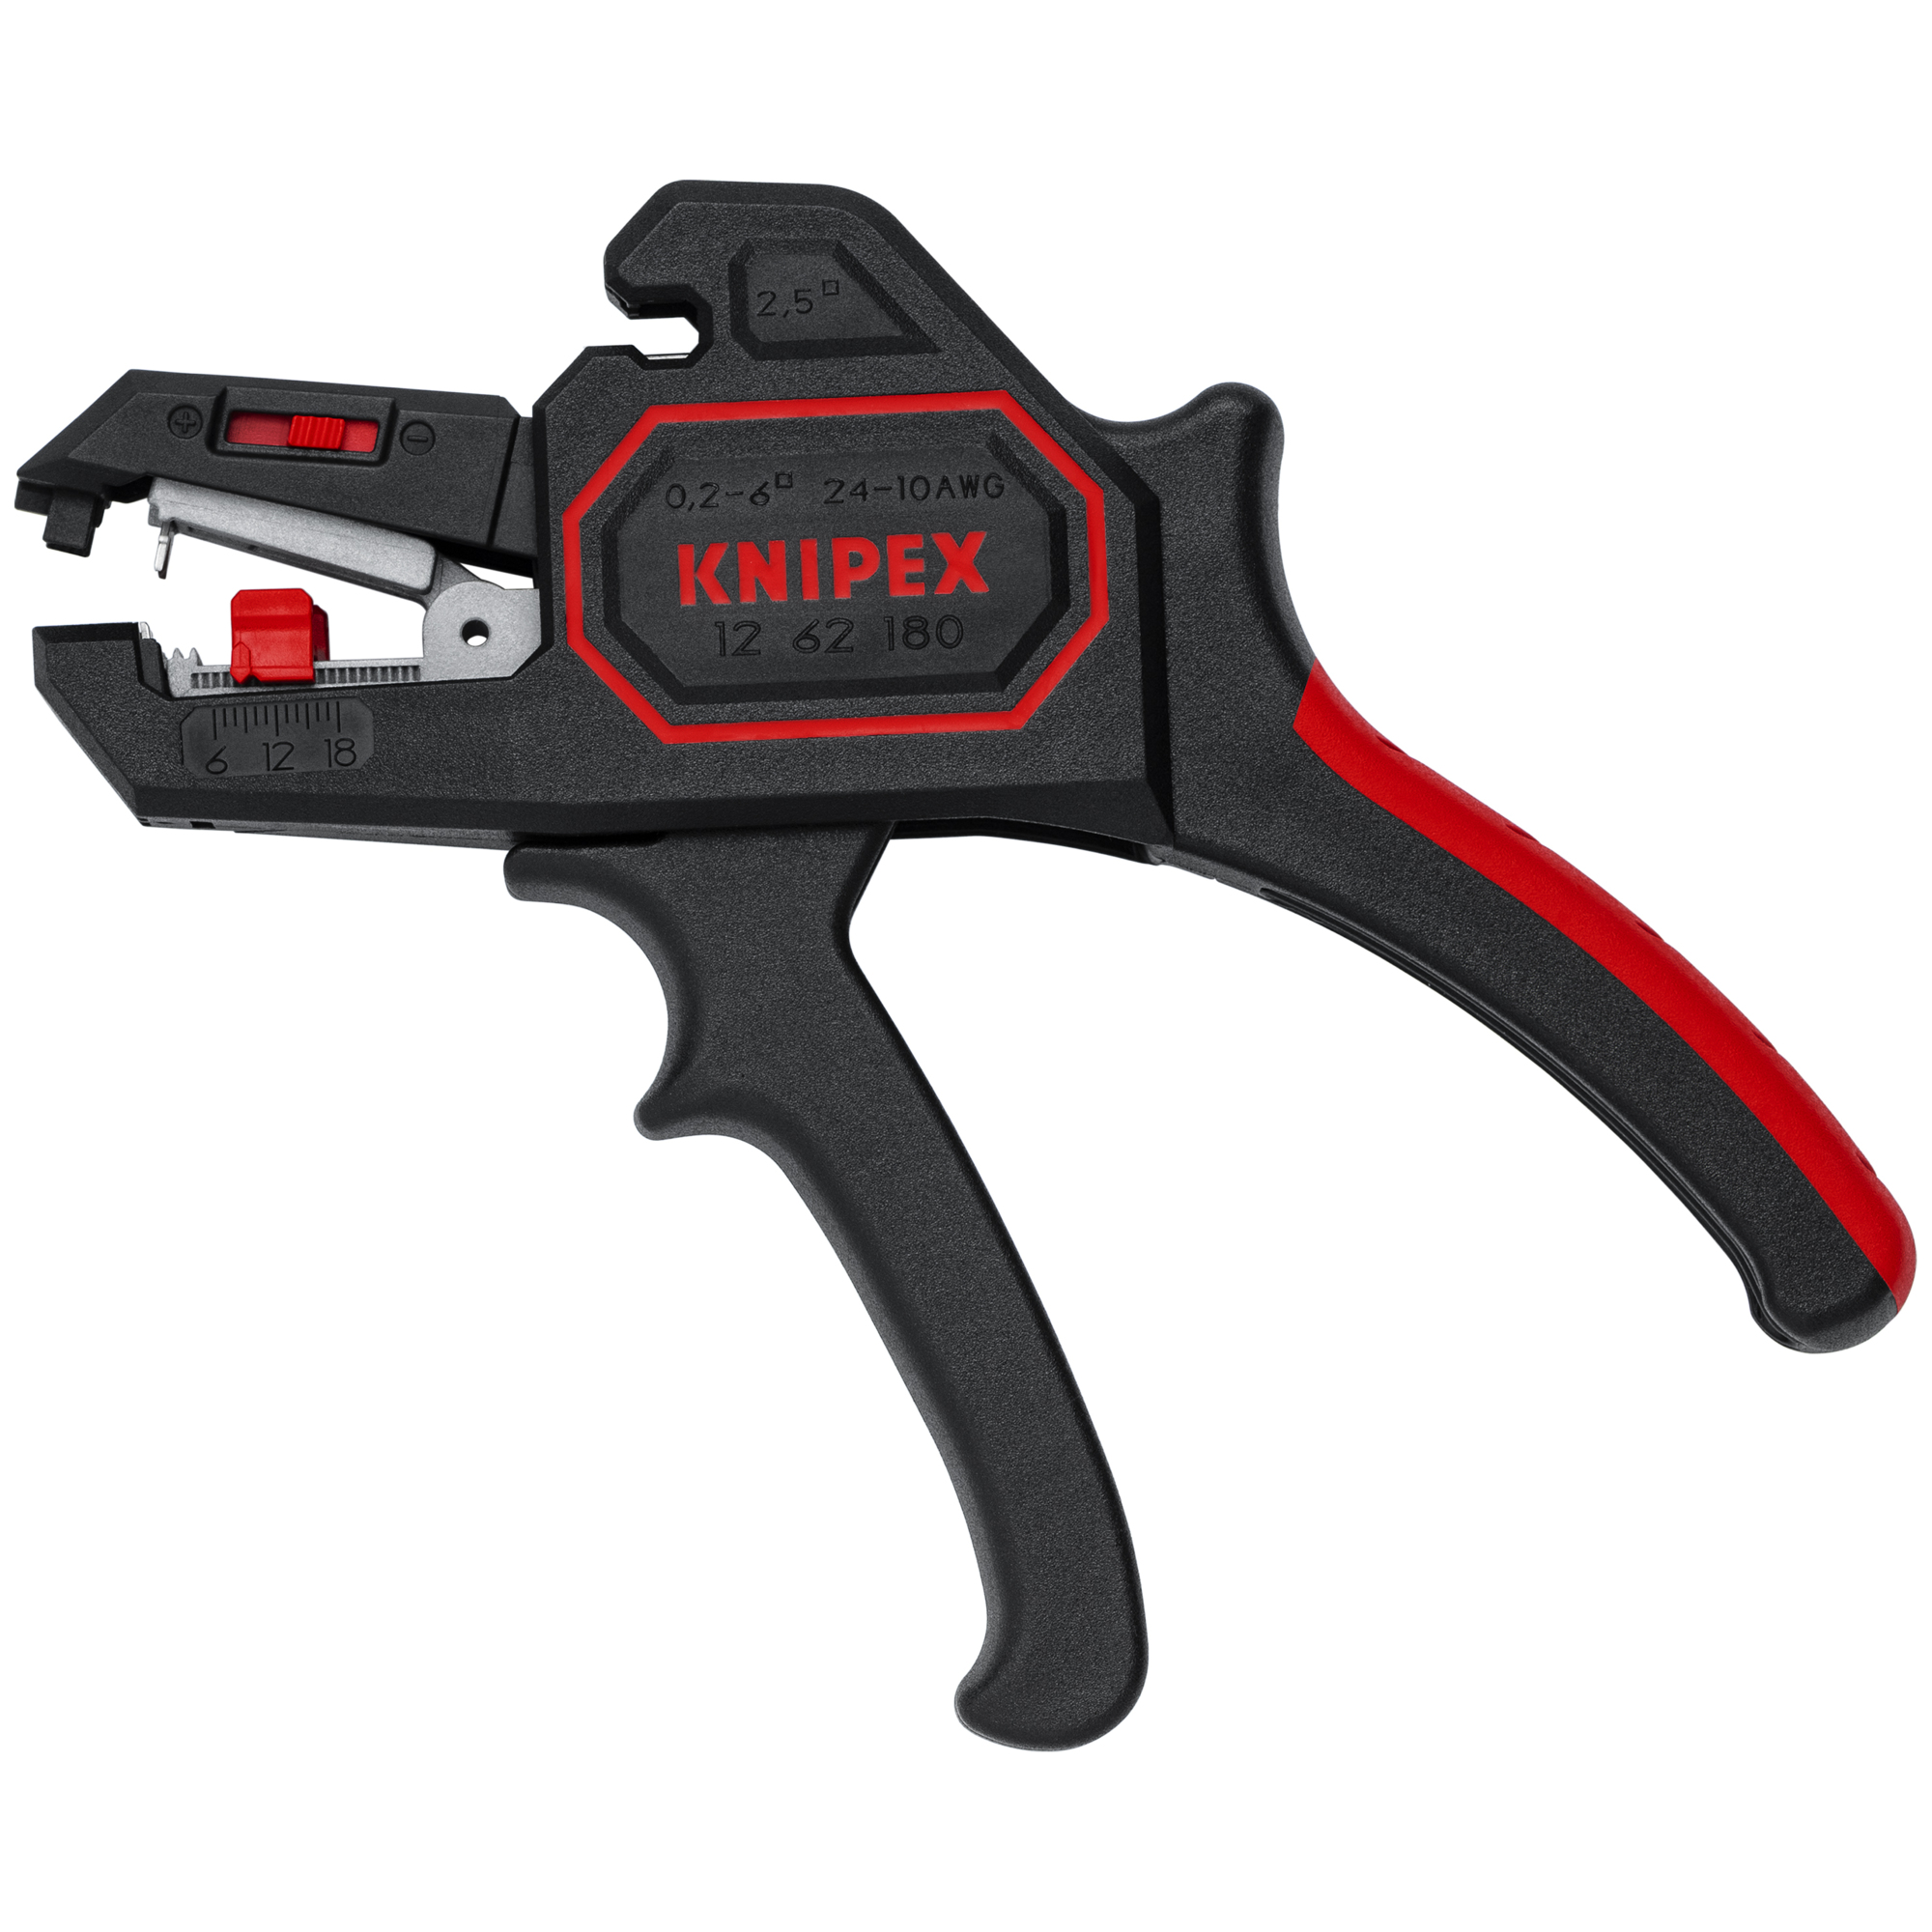 KNIPEX, Automatic Wire Stripper 10-24 AWG, 7.25Inch, Model 12 62 180